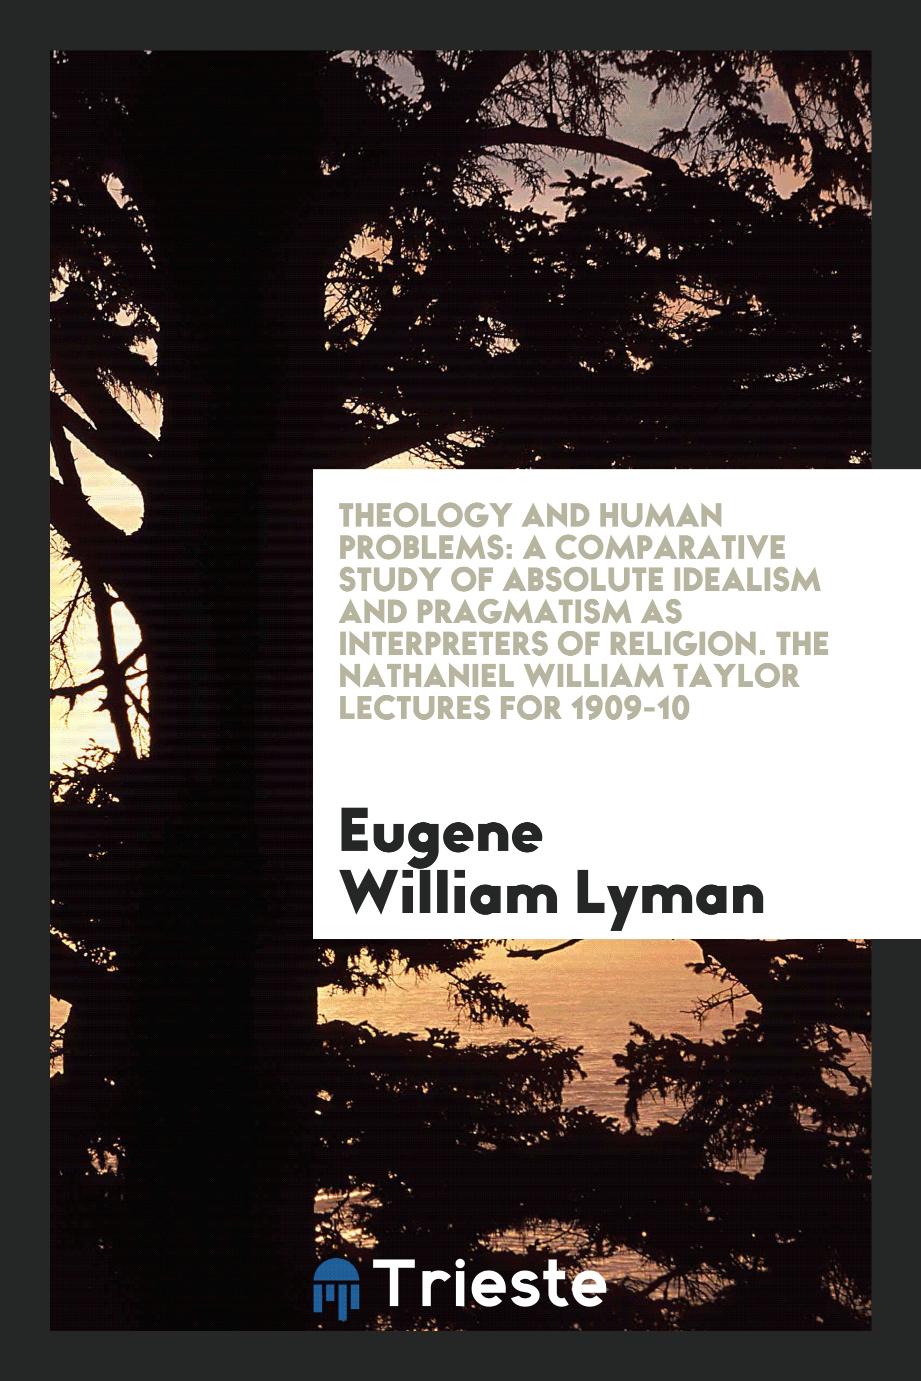 Theology and Human Problems: A Comparative Study of Absolute Idealism and Pragmatism as Interpreters of Religion. The Nathaniel William Taylor Lectures for 1909-10